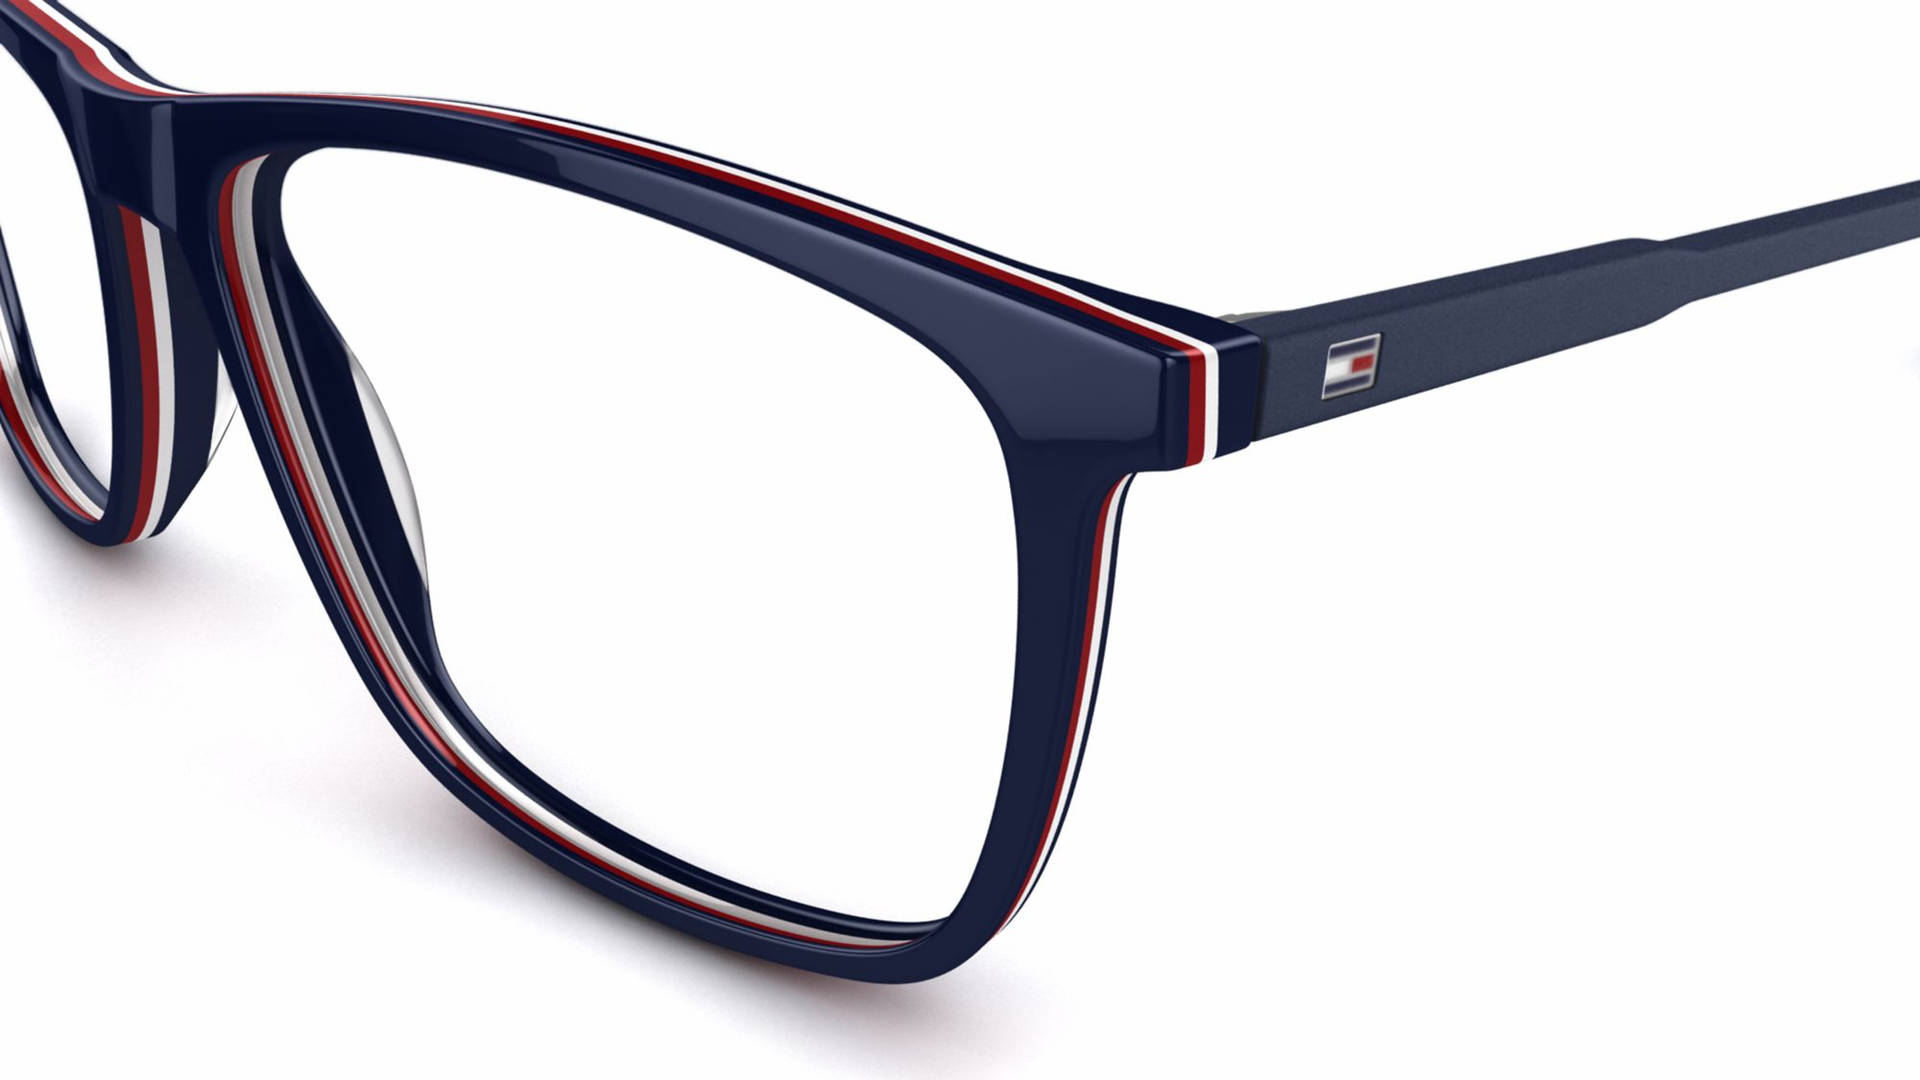 Tommyhilfiger-glasögon Th 81 (no Translation Needed As It Is A Brand Name) Wallpaper